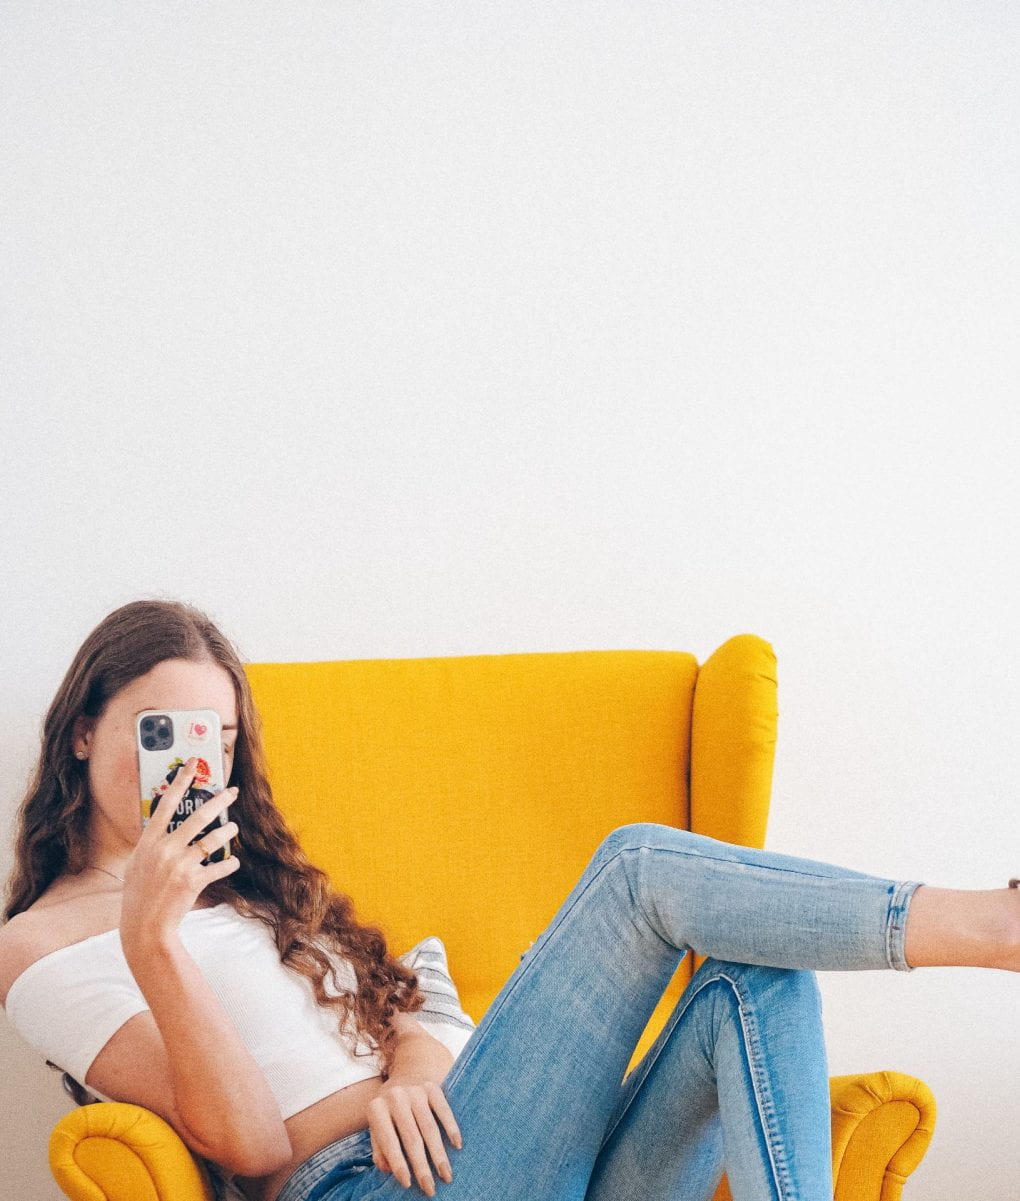 woman in white top and jeans on yellow arm chair holding smartphone